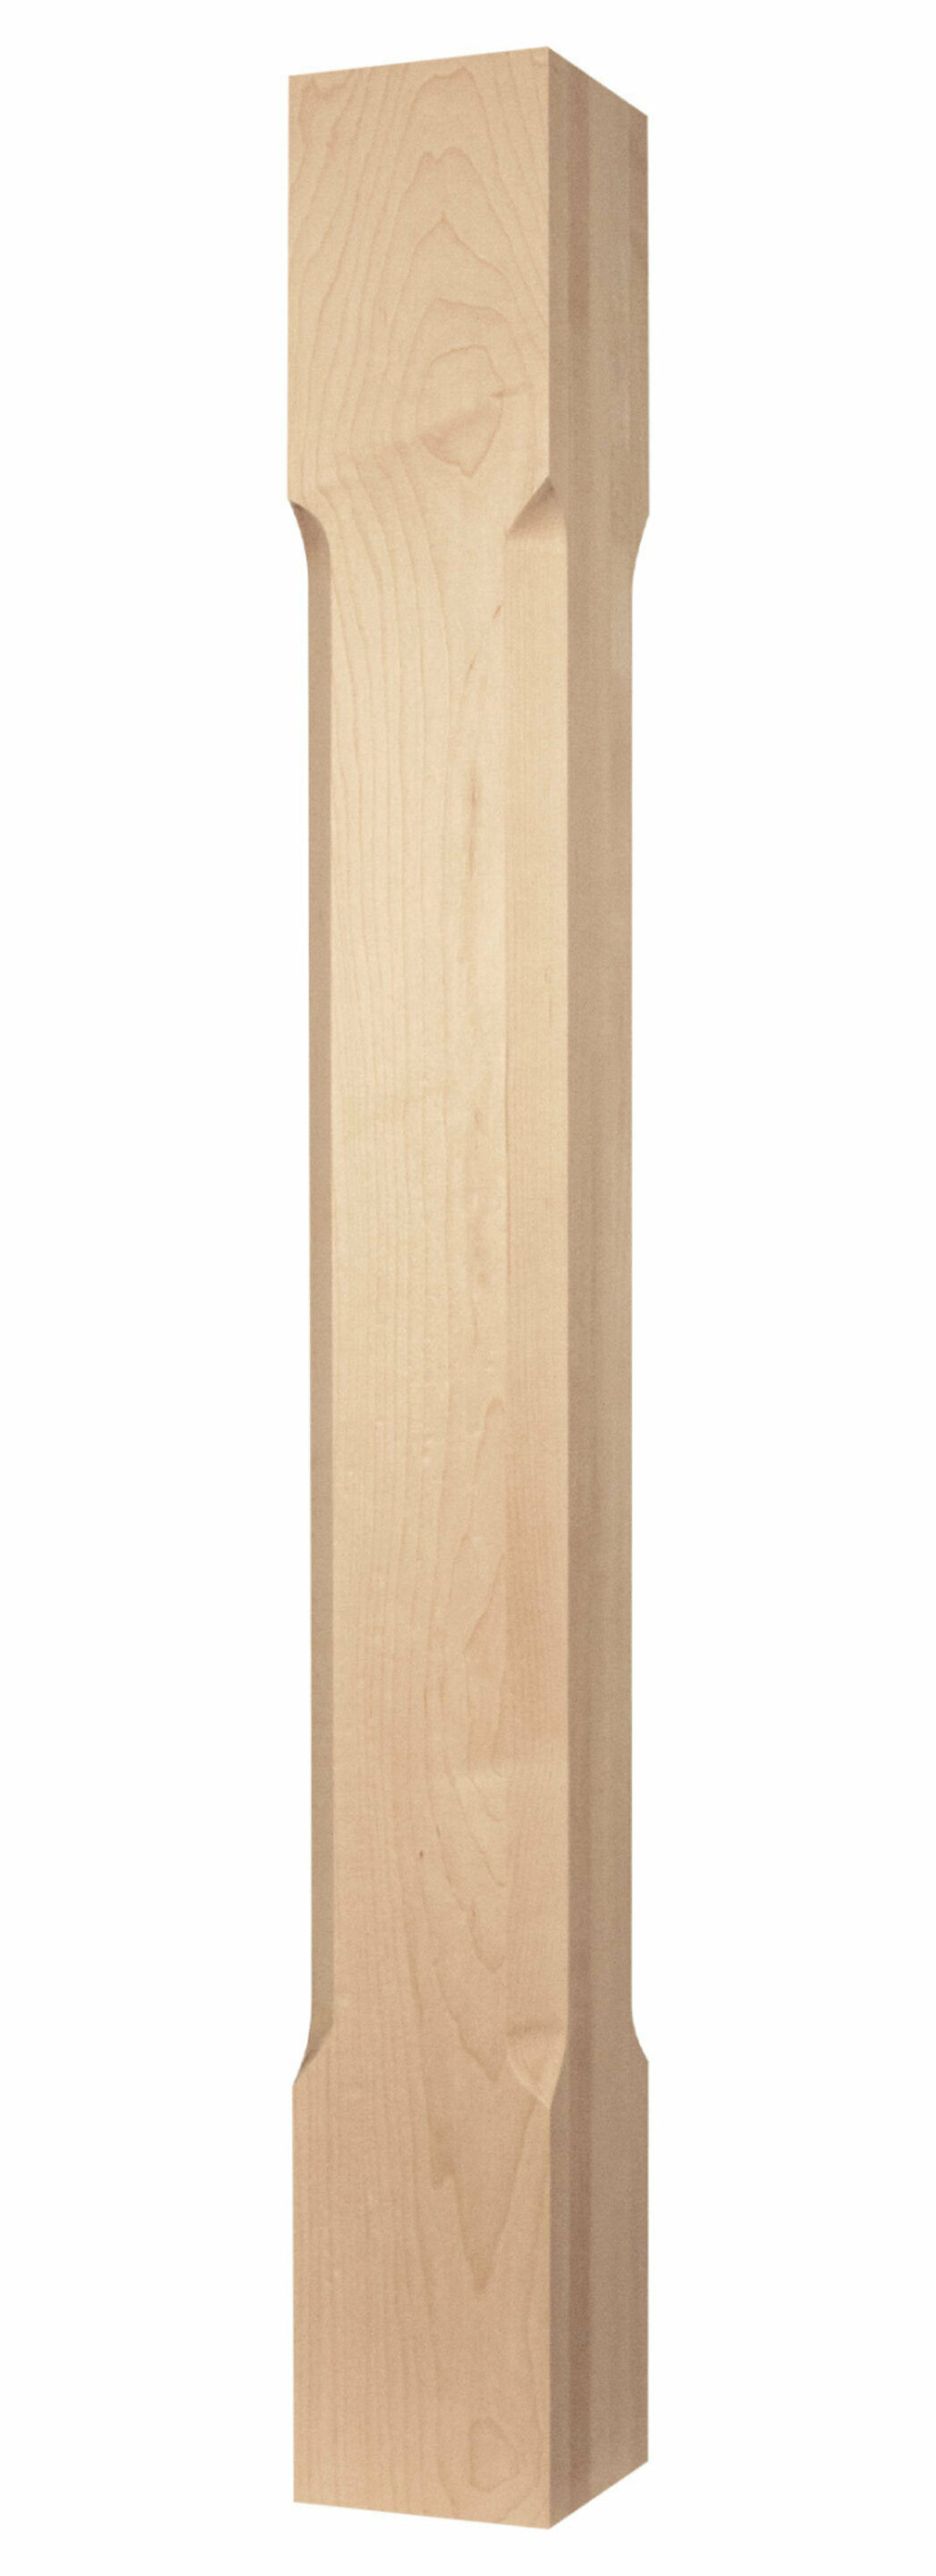 Four Sided Tapered Dining Table Leg